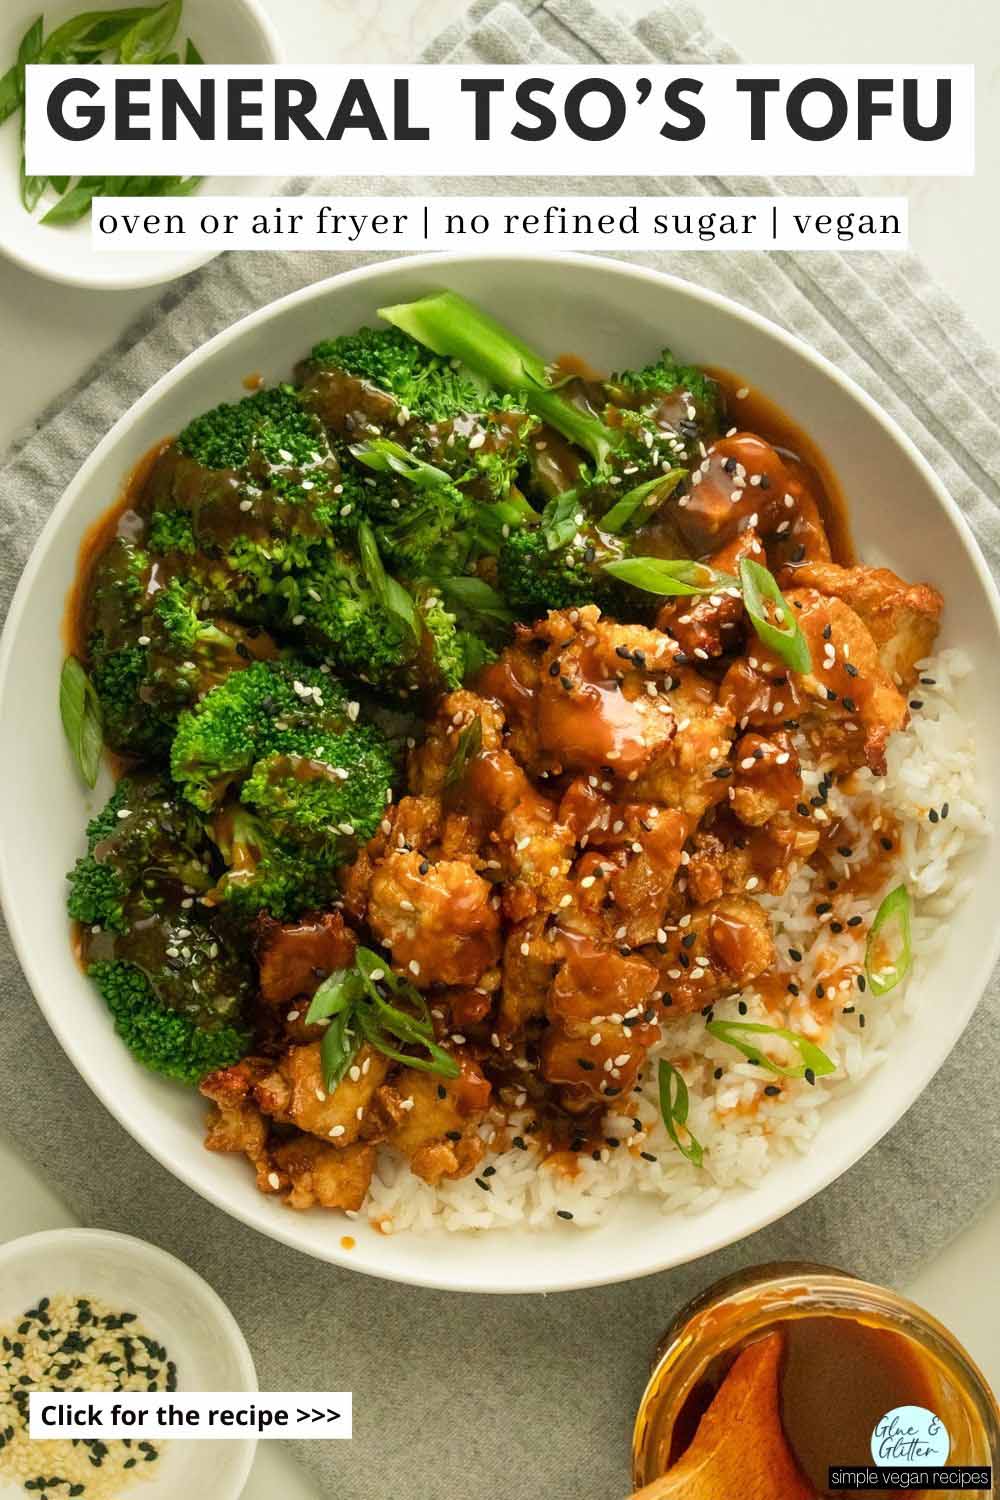 general tso's tofu in a white bowl with broccoli and rice, text overlay